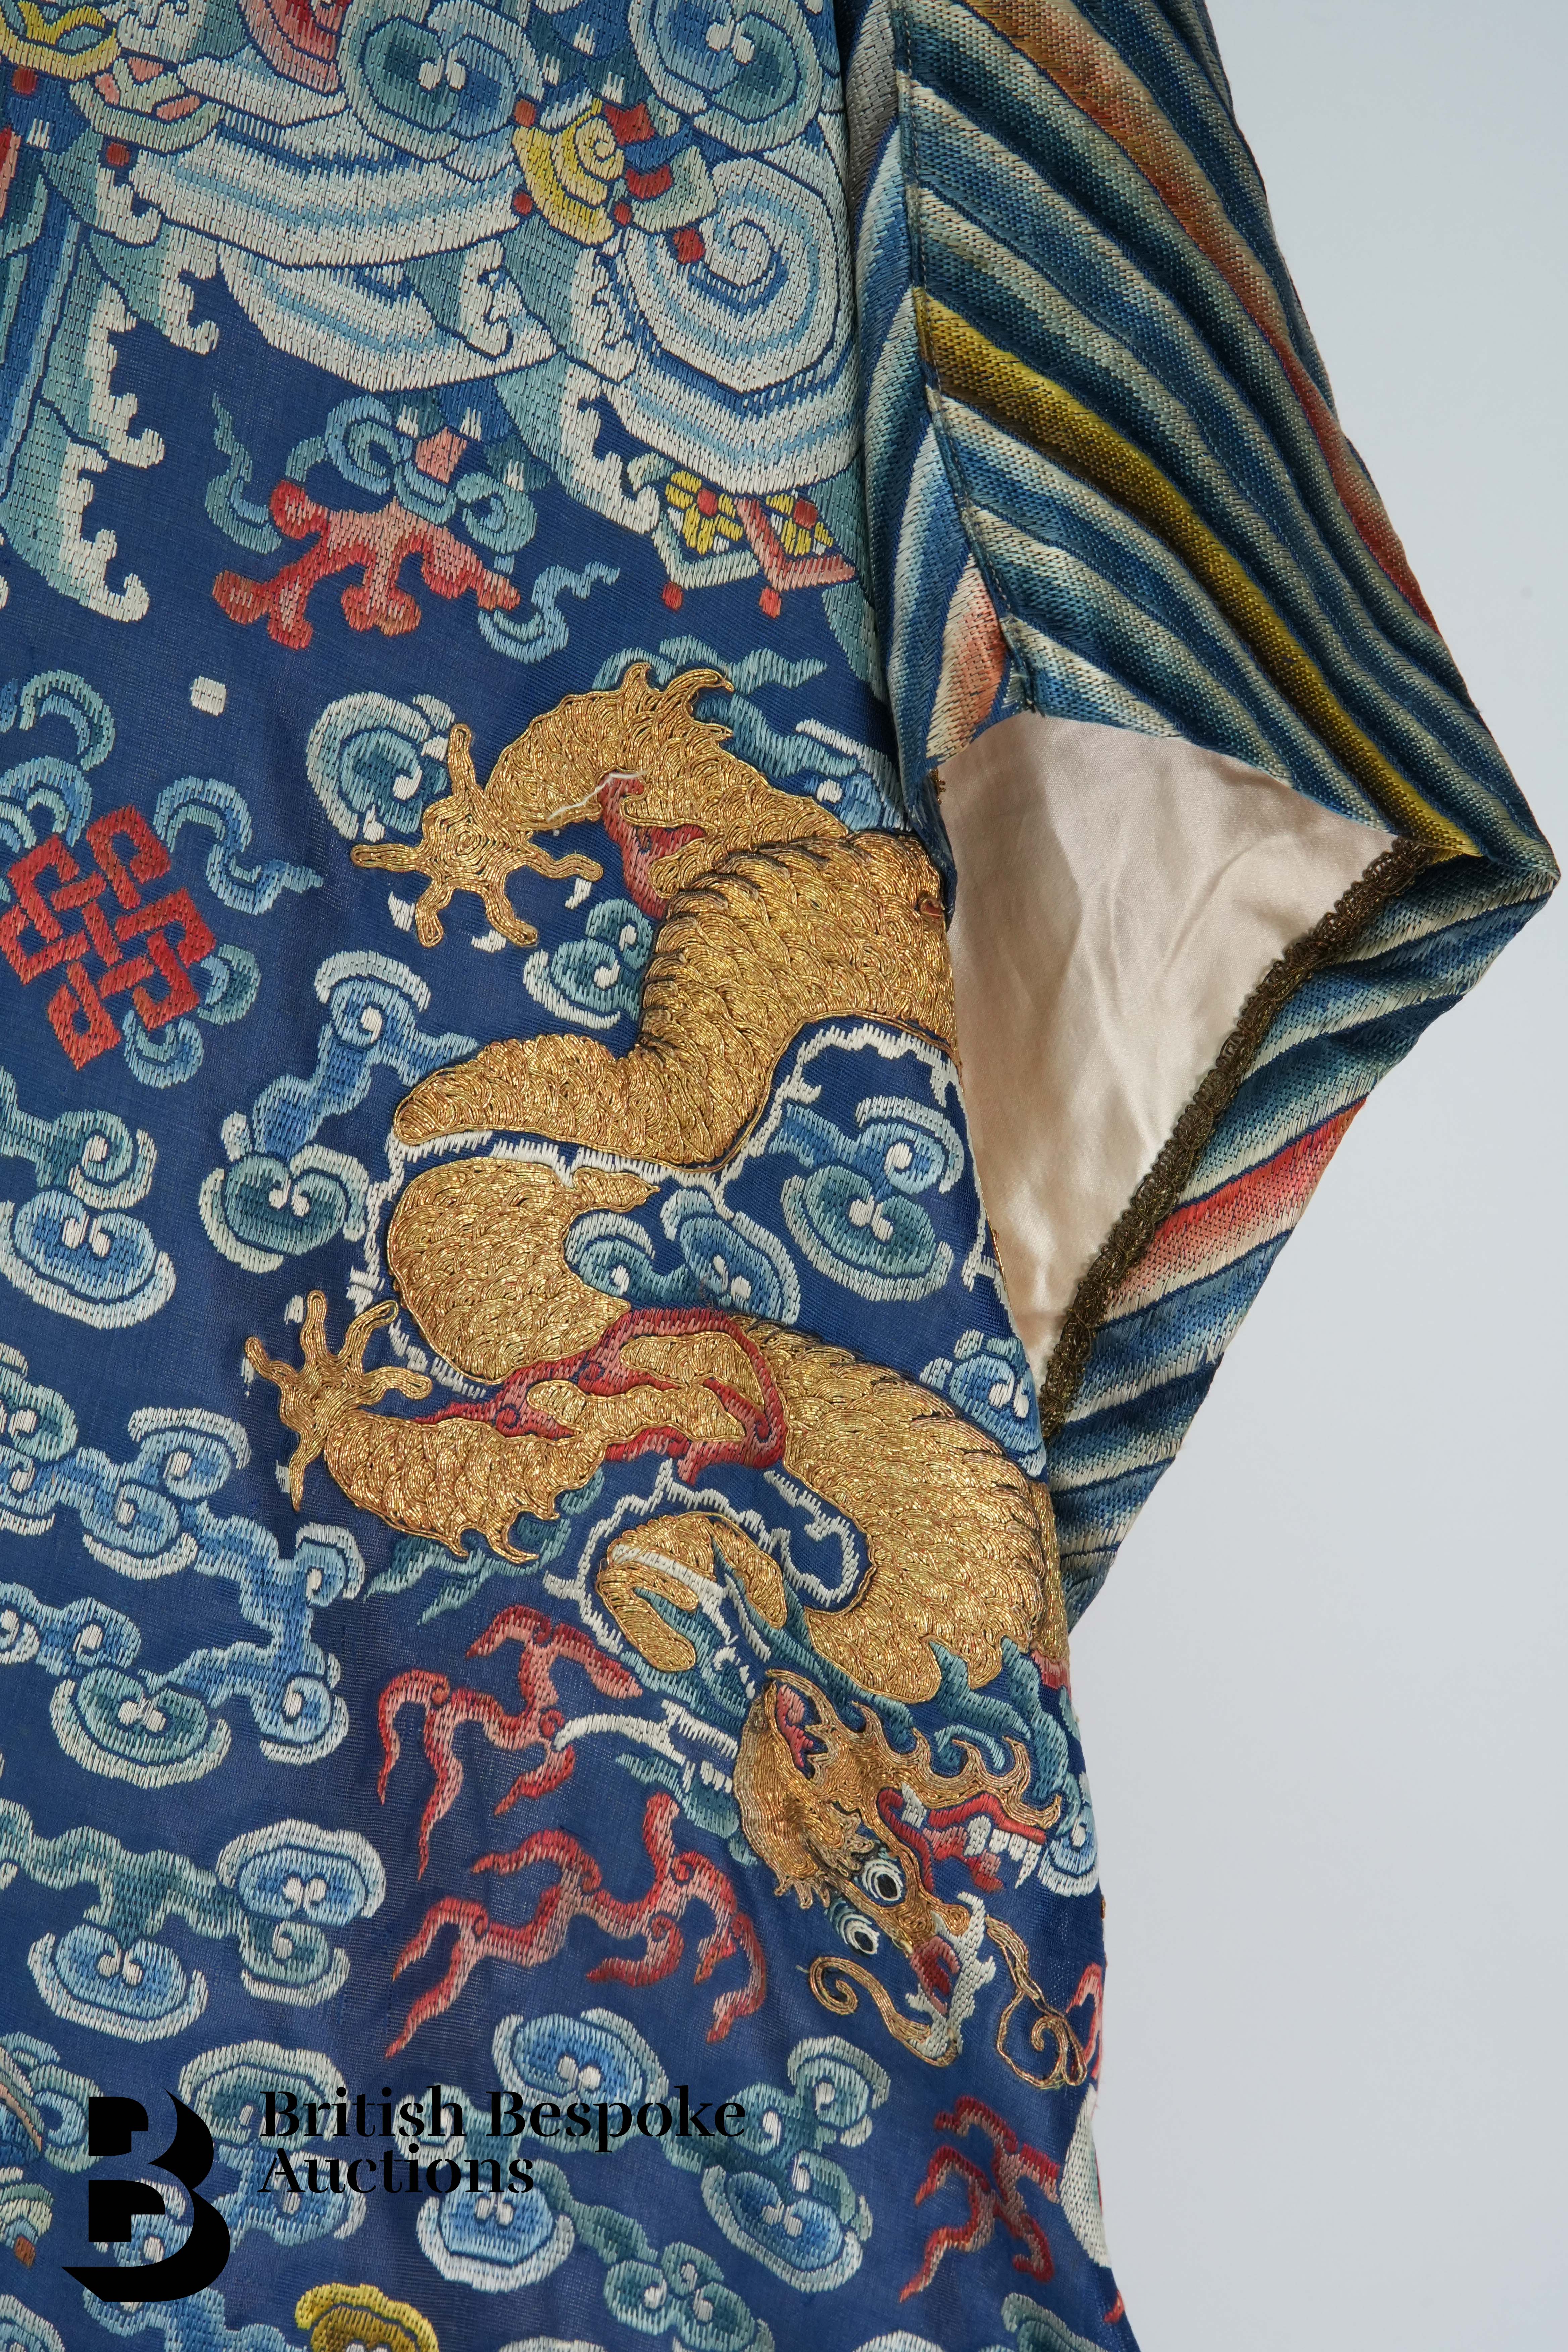 Chinese Imperial Blue Silk Embroidered Cloak - Image 8 of 14